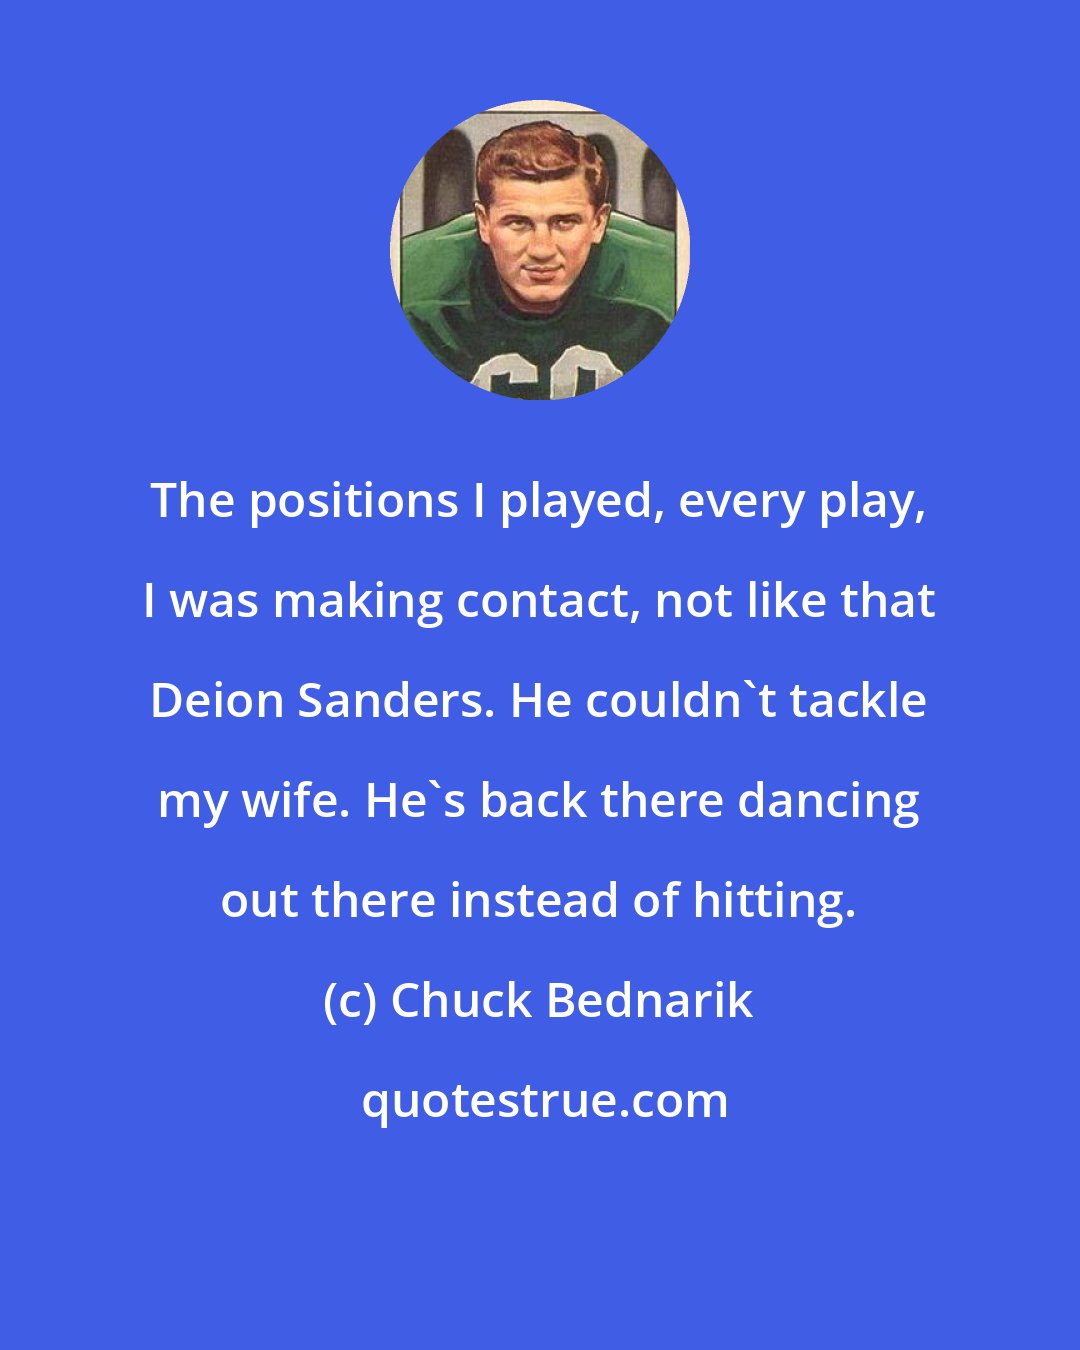 Chuck Bednarik: The positions I played, every play, I was making contact, not like that Deion Sanders. He couldn't tackle my wife. He's back there dancing out there instead of hitting.